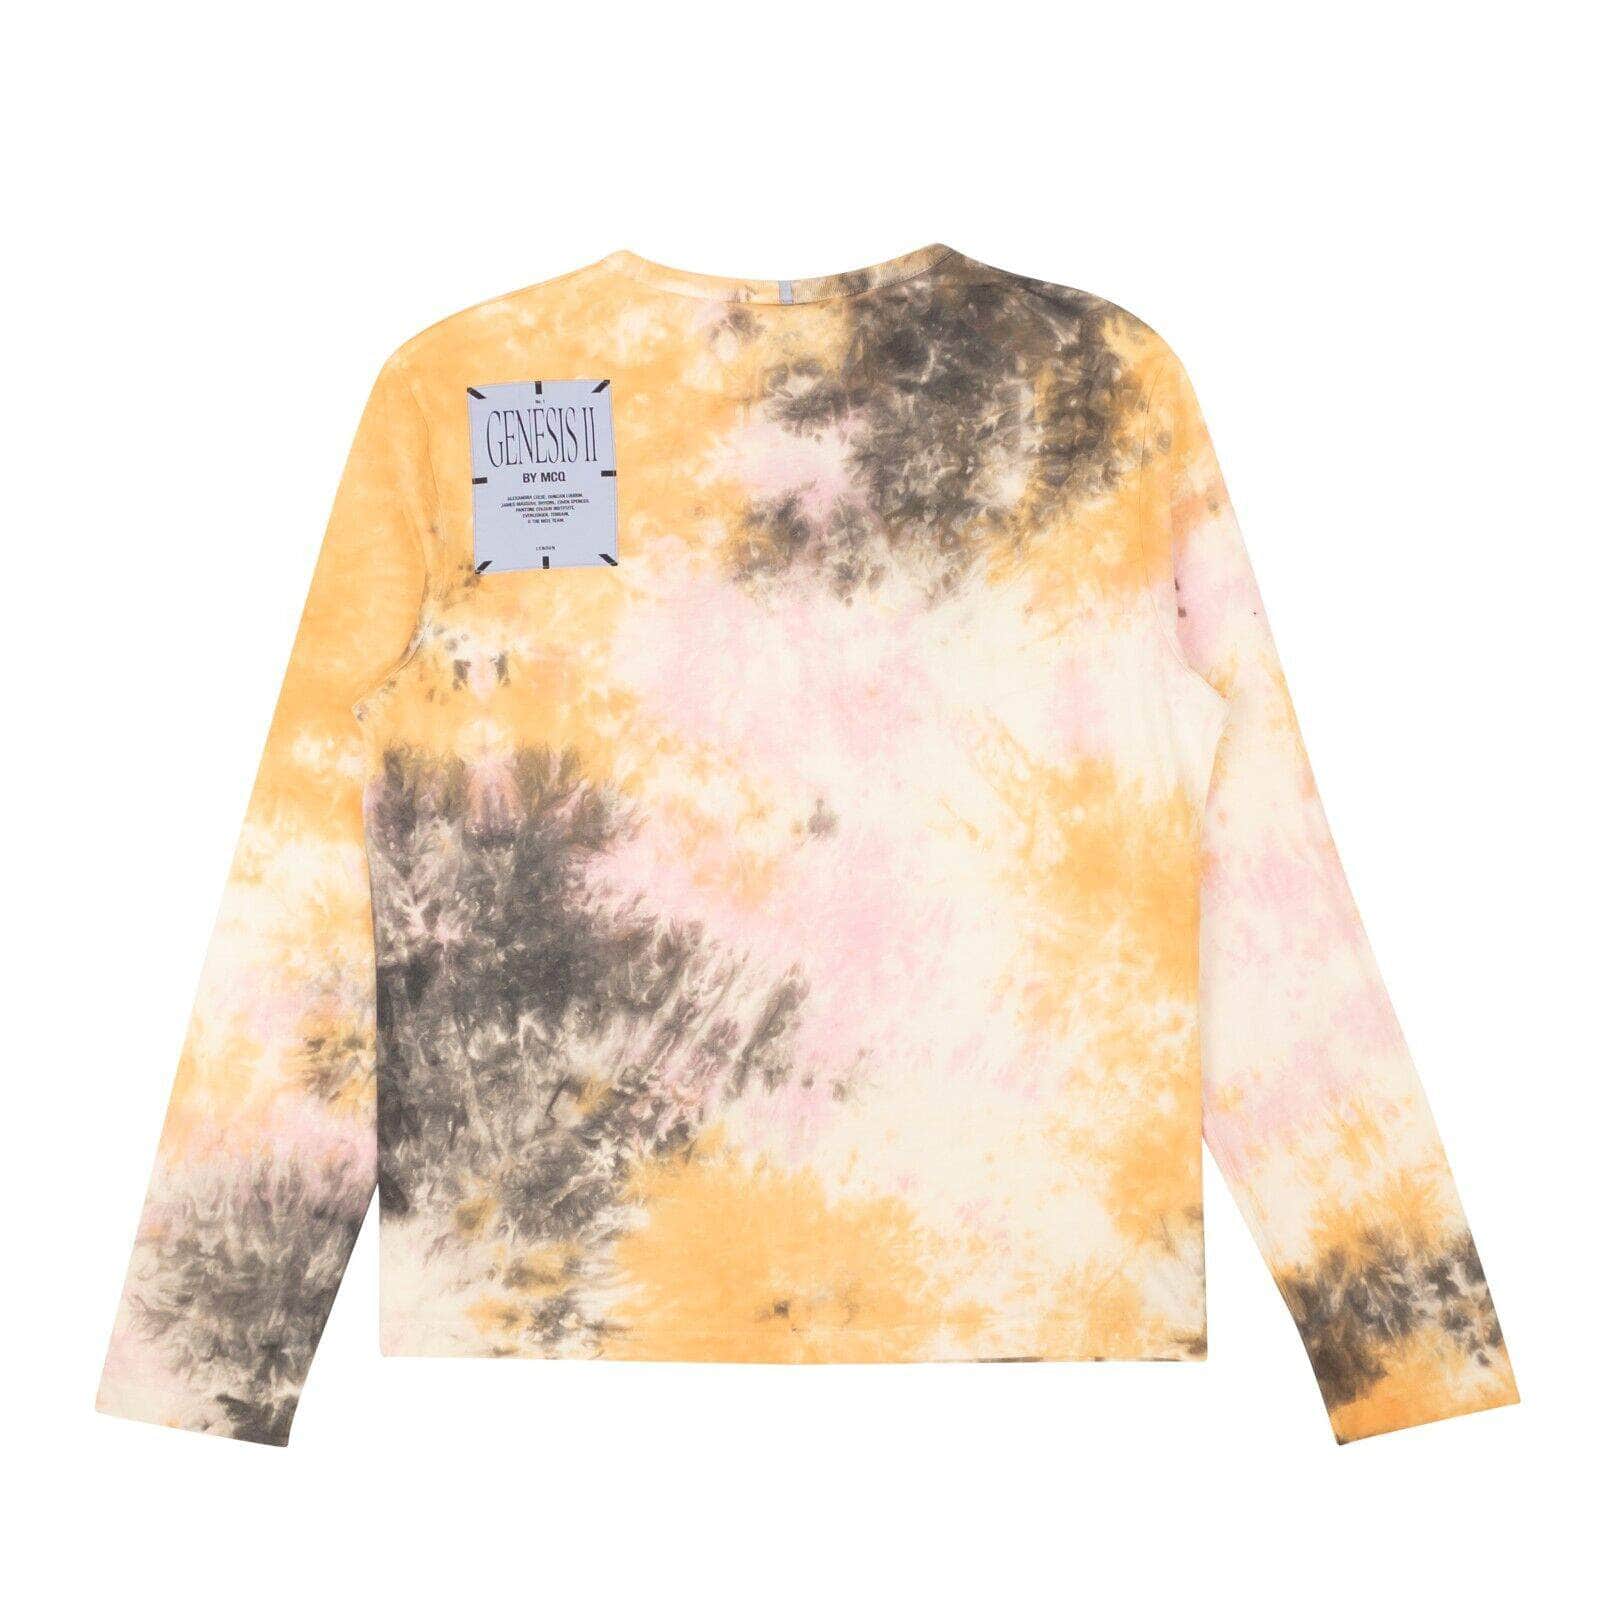 MCQ channelenable-all, chicmi, couponcollection, gender-mens, main-clothing, mcq, mens-shoes, size-m, size-s, under-250 S / 6.25E+05 Multi Tie Dye Unity Jersey Long Sleeve T-Shirt 95-MCQ-1007/S 95-MCQ-1007/S